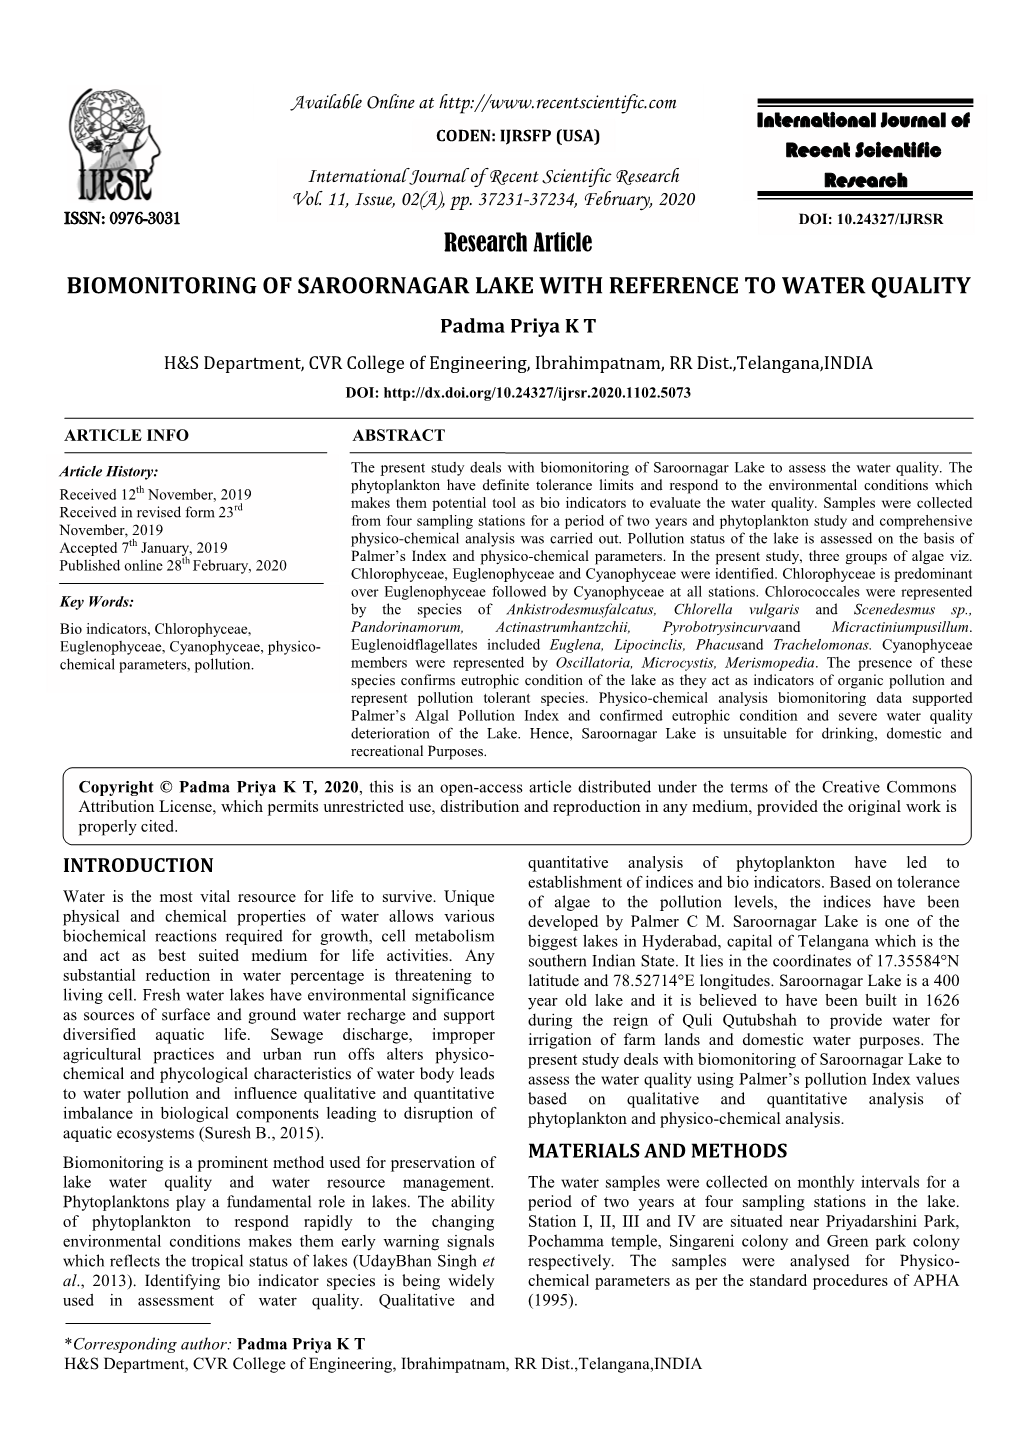 Research Article BIOMONITORING of SAROORNAGAR LAKE with REFERENCE to WATER QUALITY